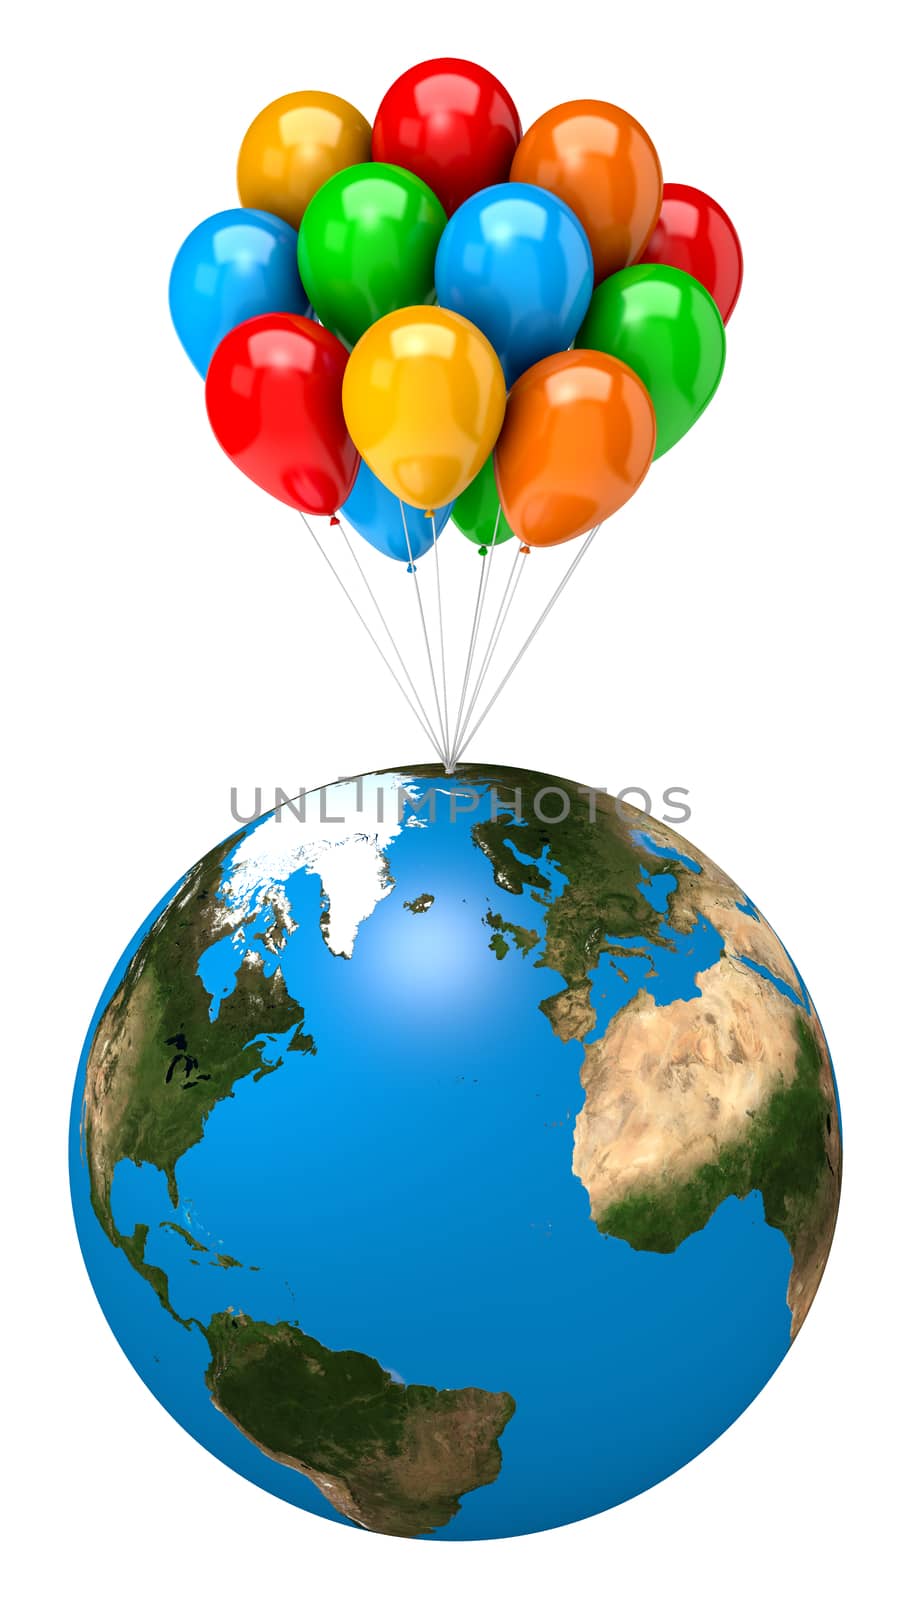 Bunch of Balloons Holding Up the Earth Planet by make